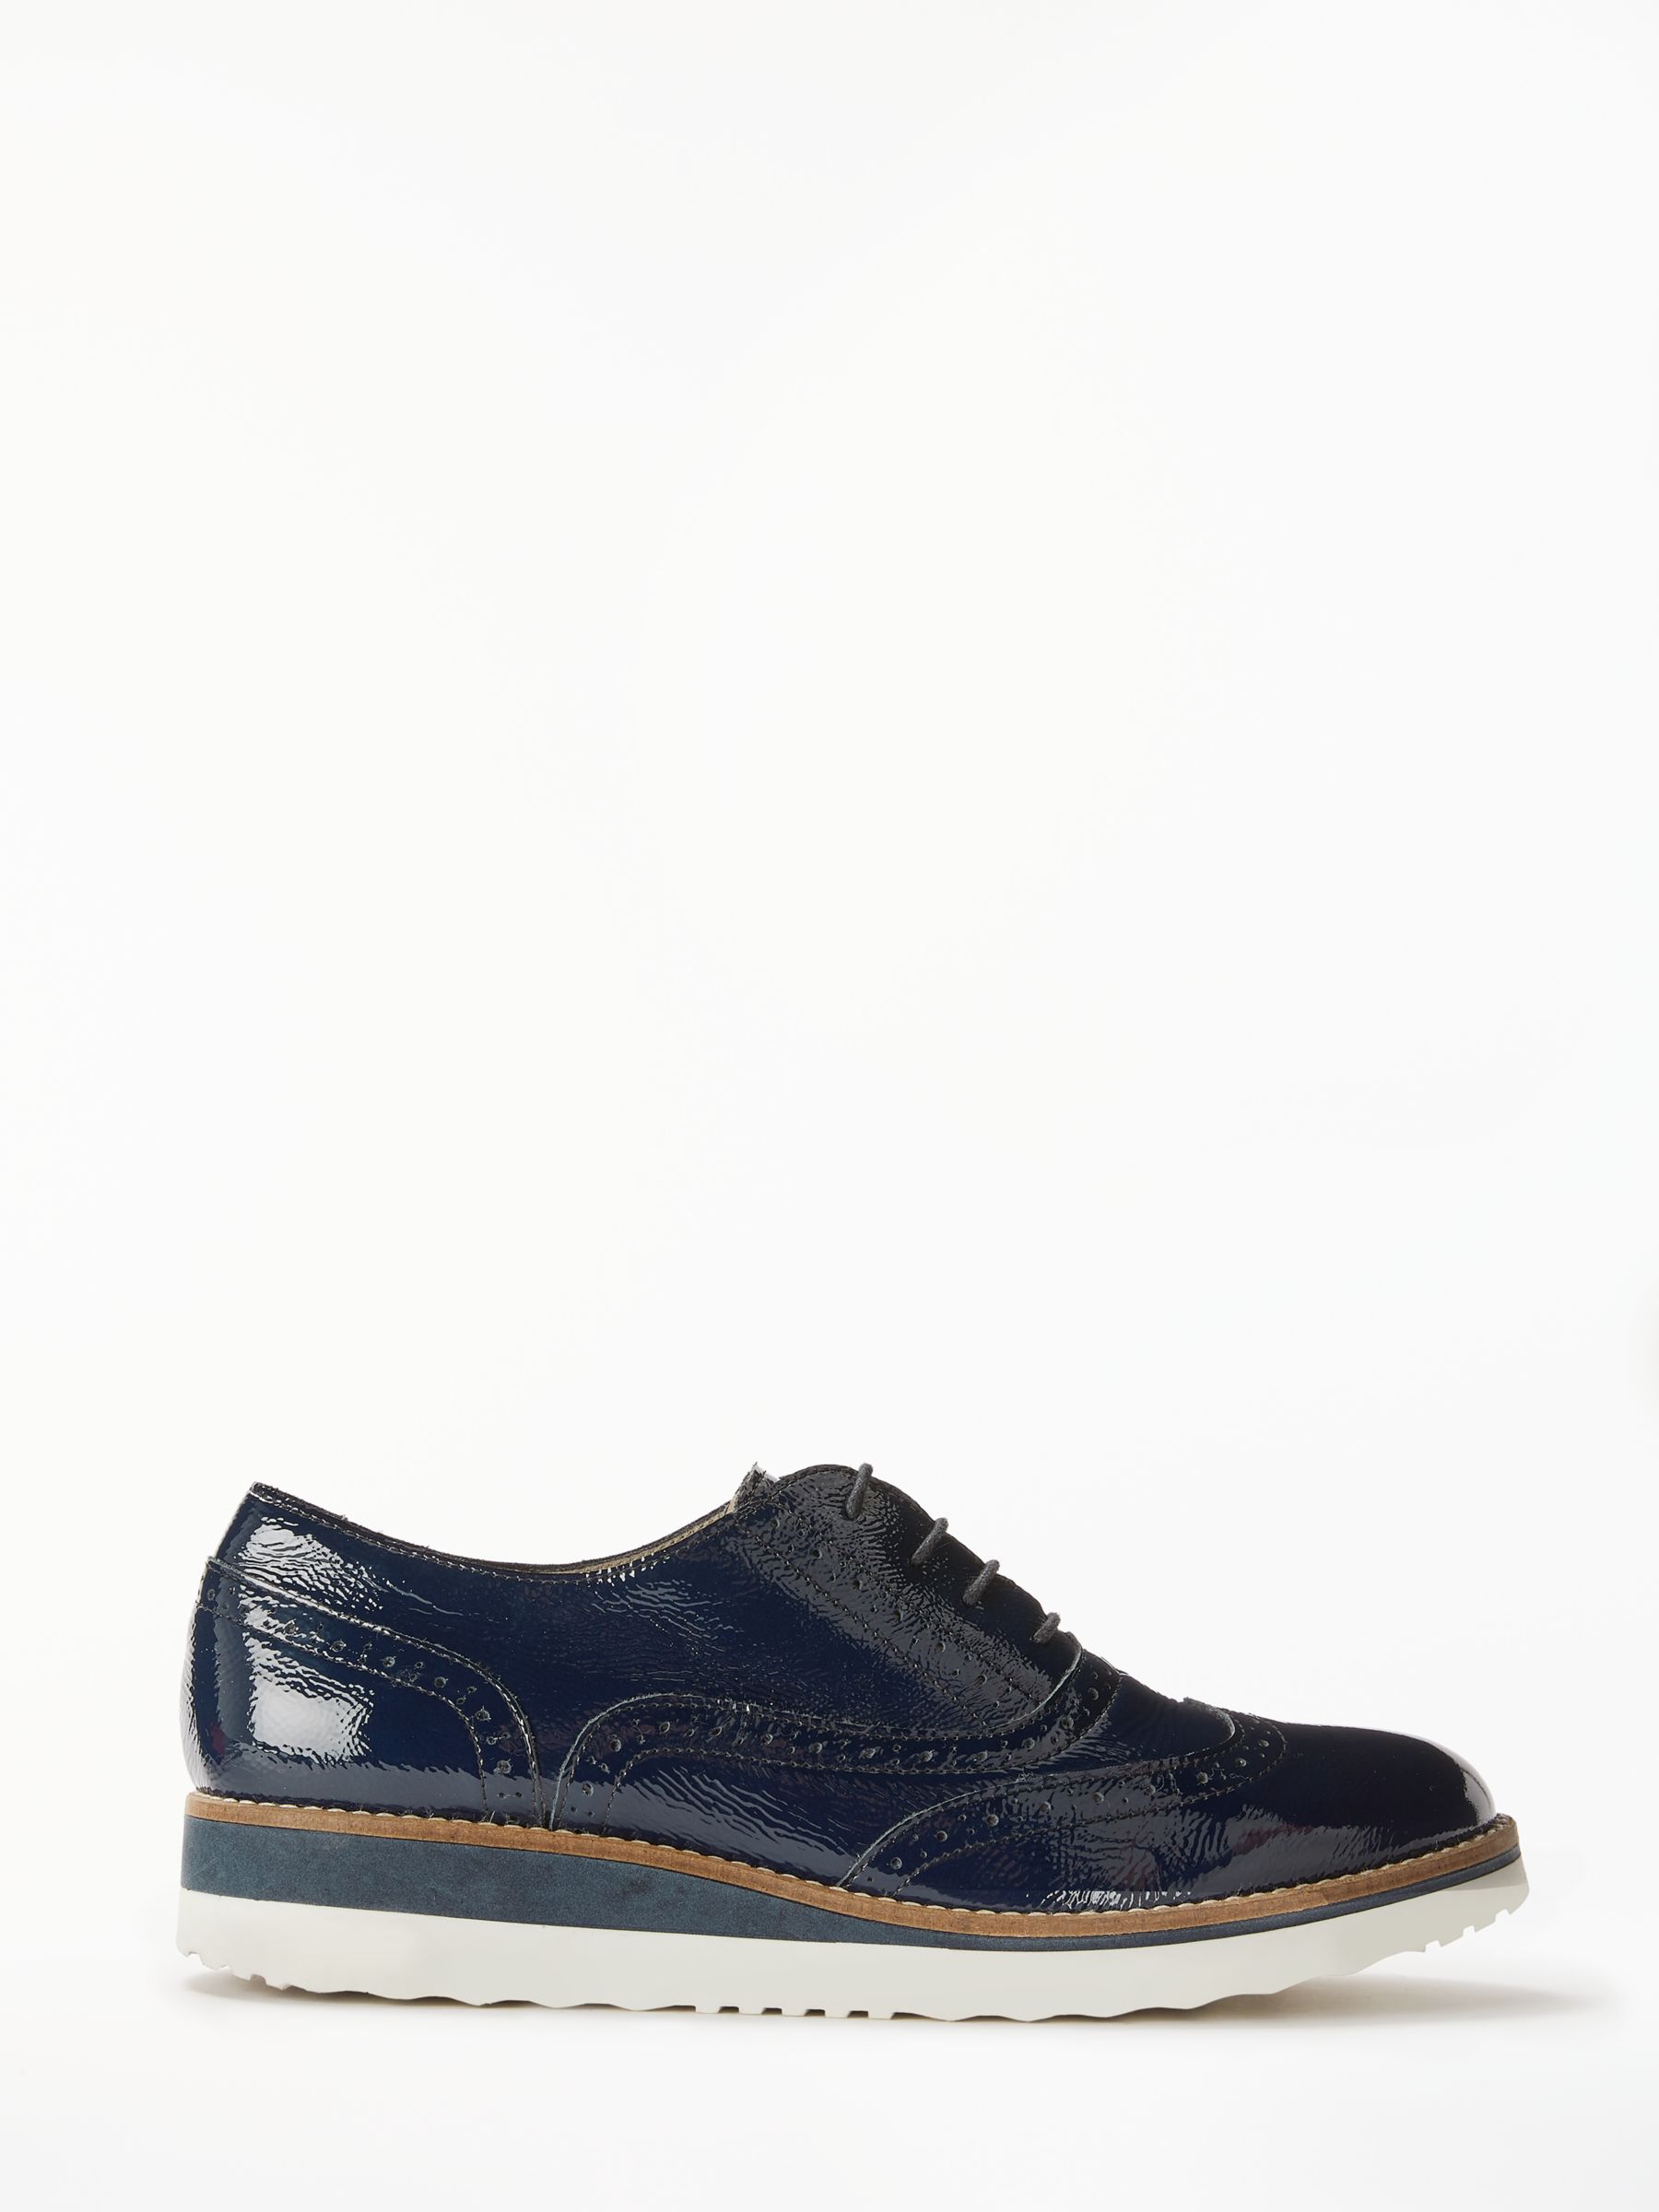 Boden Nina Flatform Lace Up Brogues, Navy Patent Leather